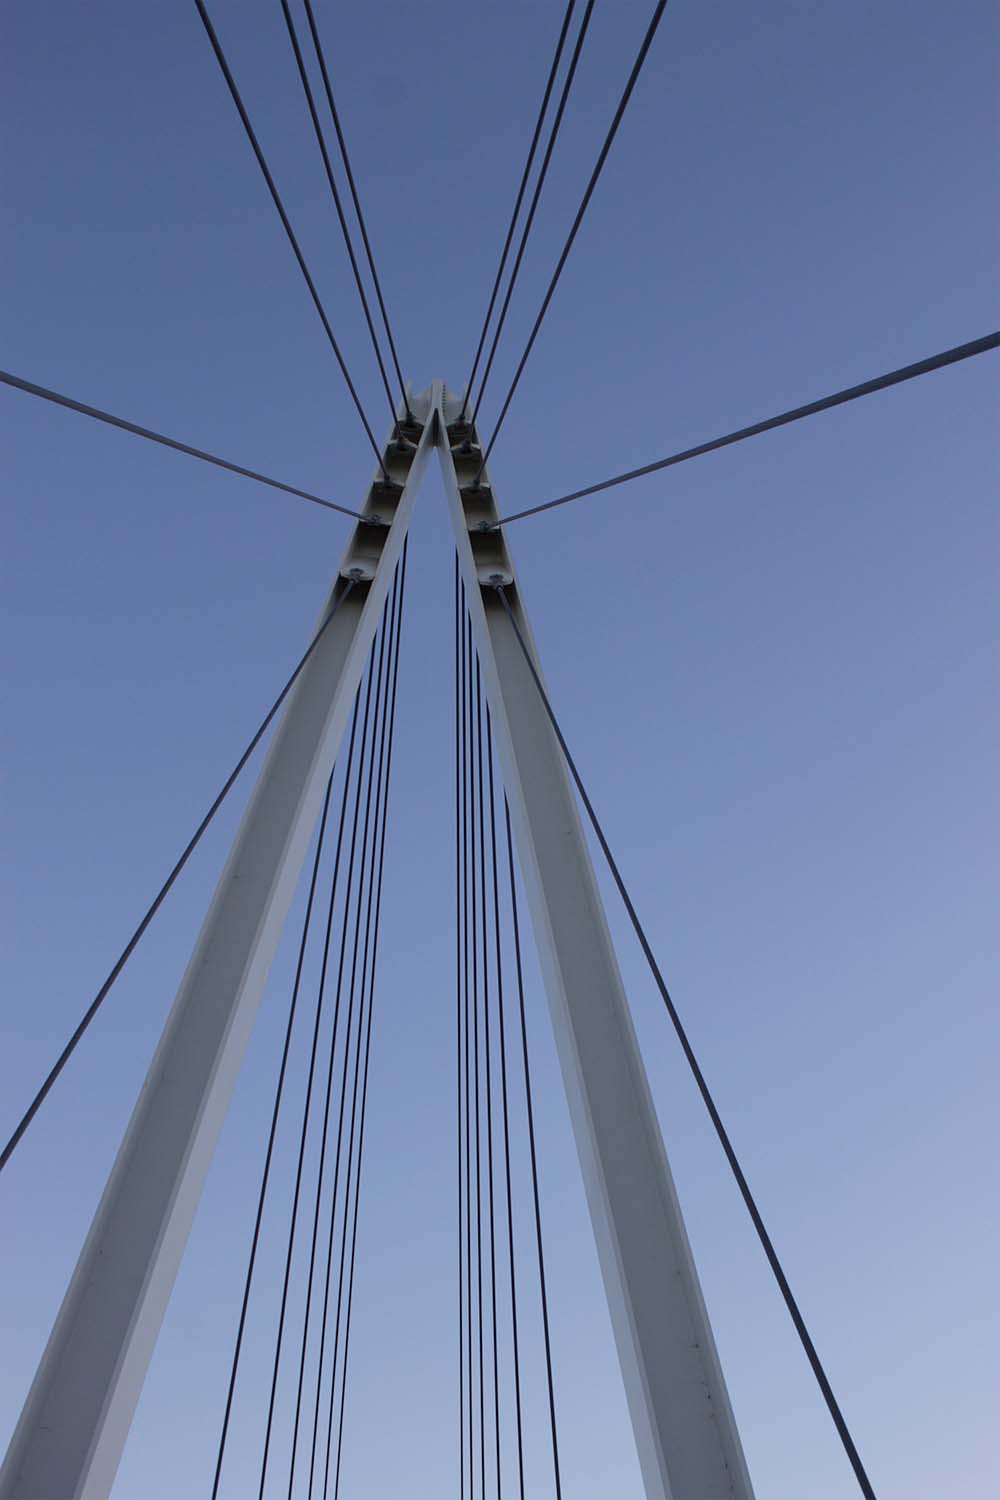 A bridge with lines all connecting to the top